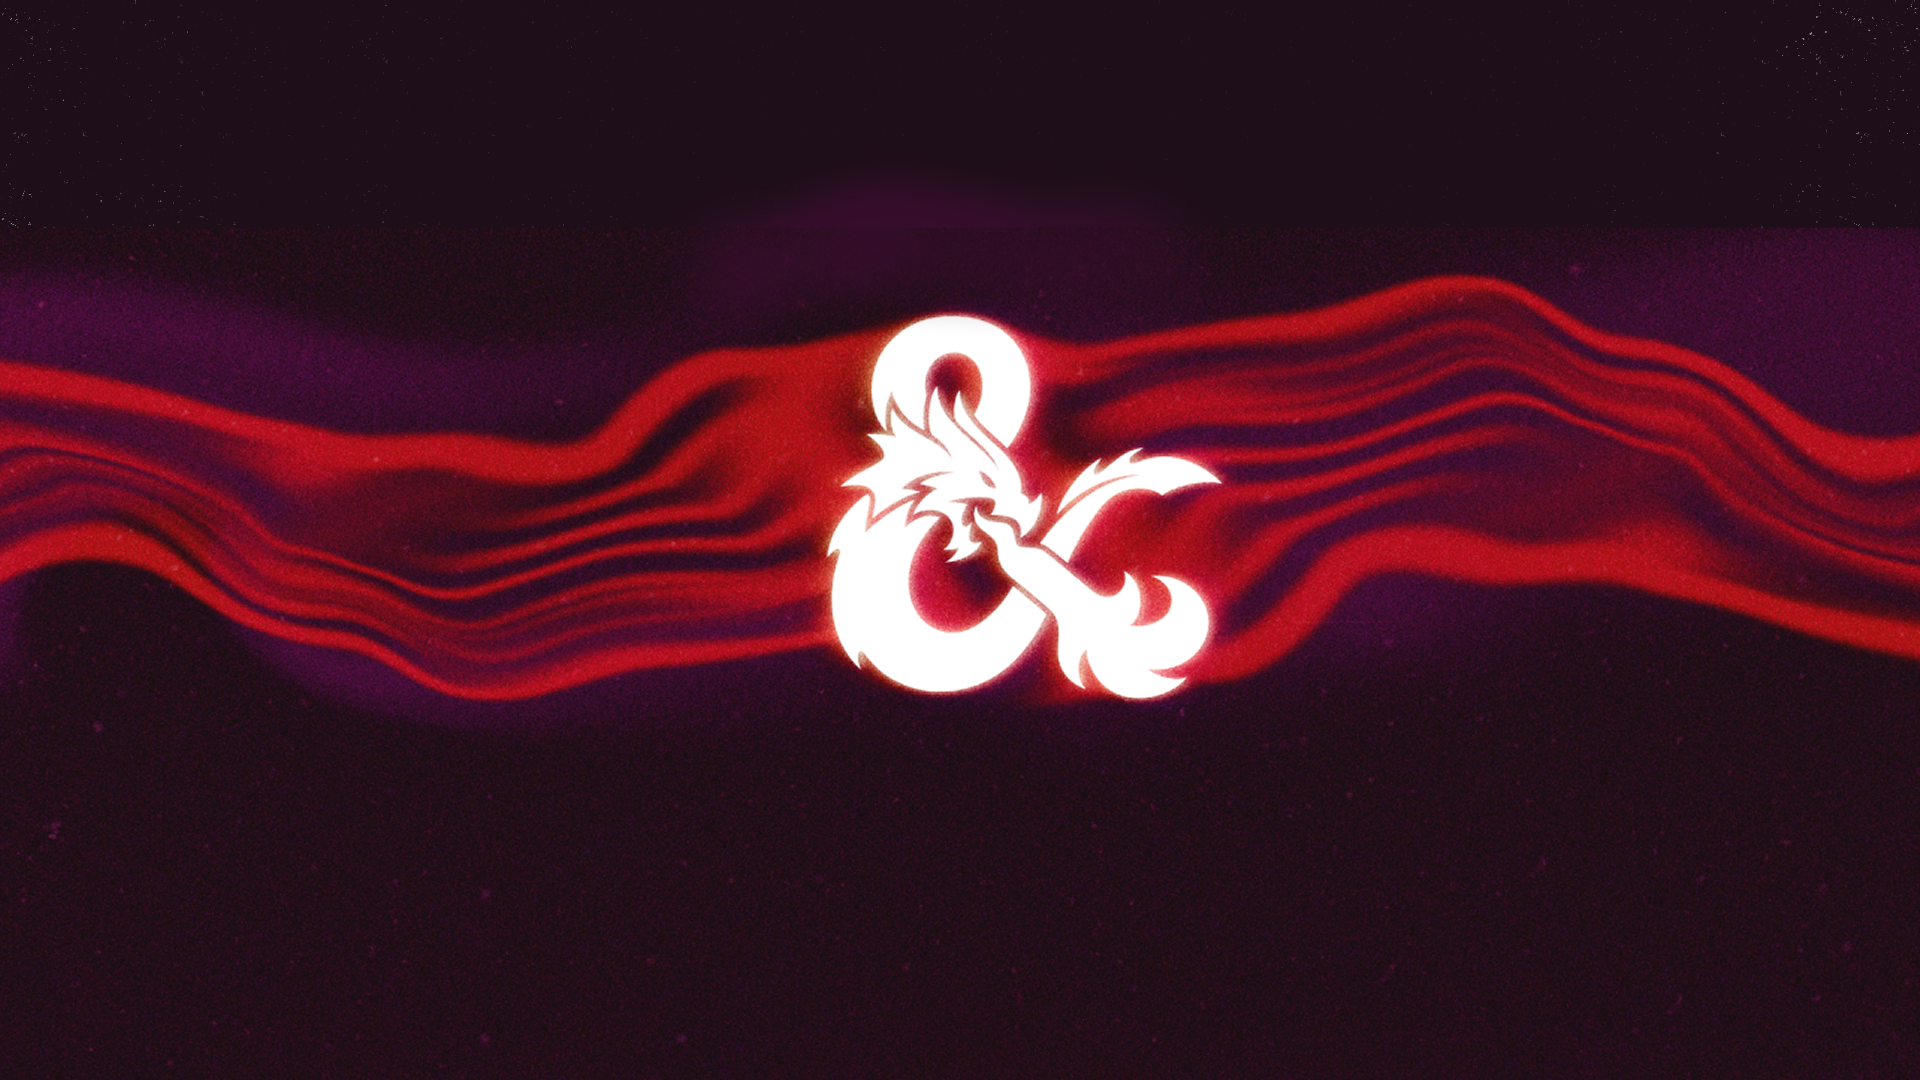 A stylized image with the D&amp;D amperstand logo in the middle. The ampersand is a dragon breathing fire.